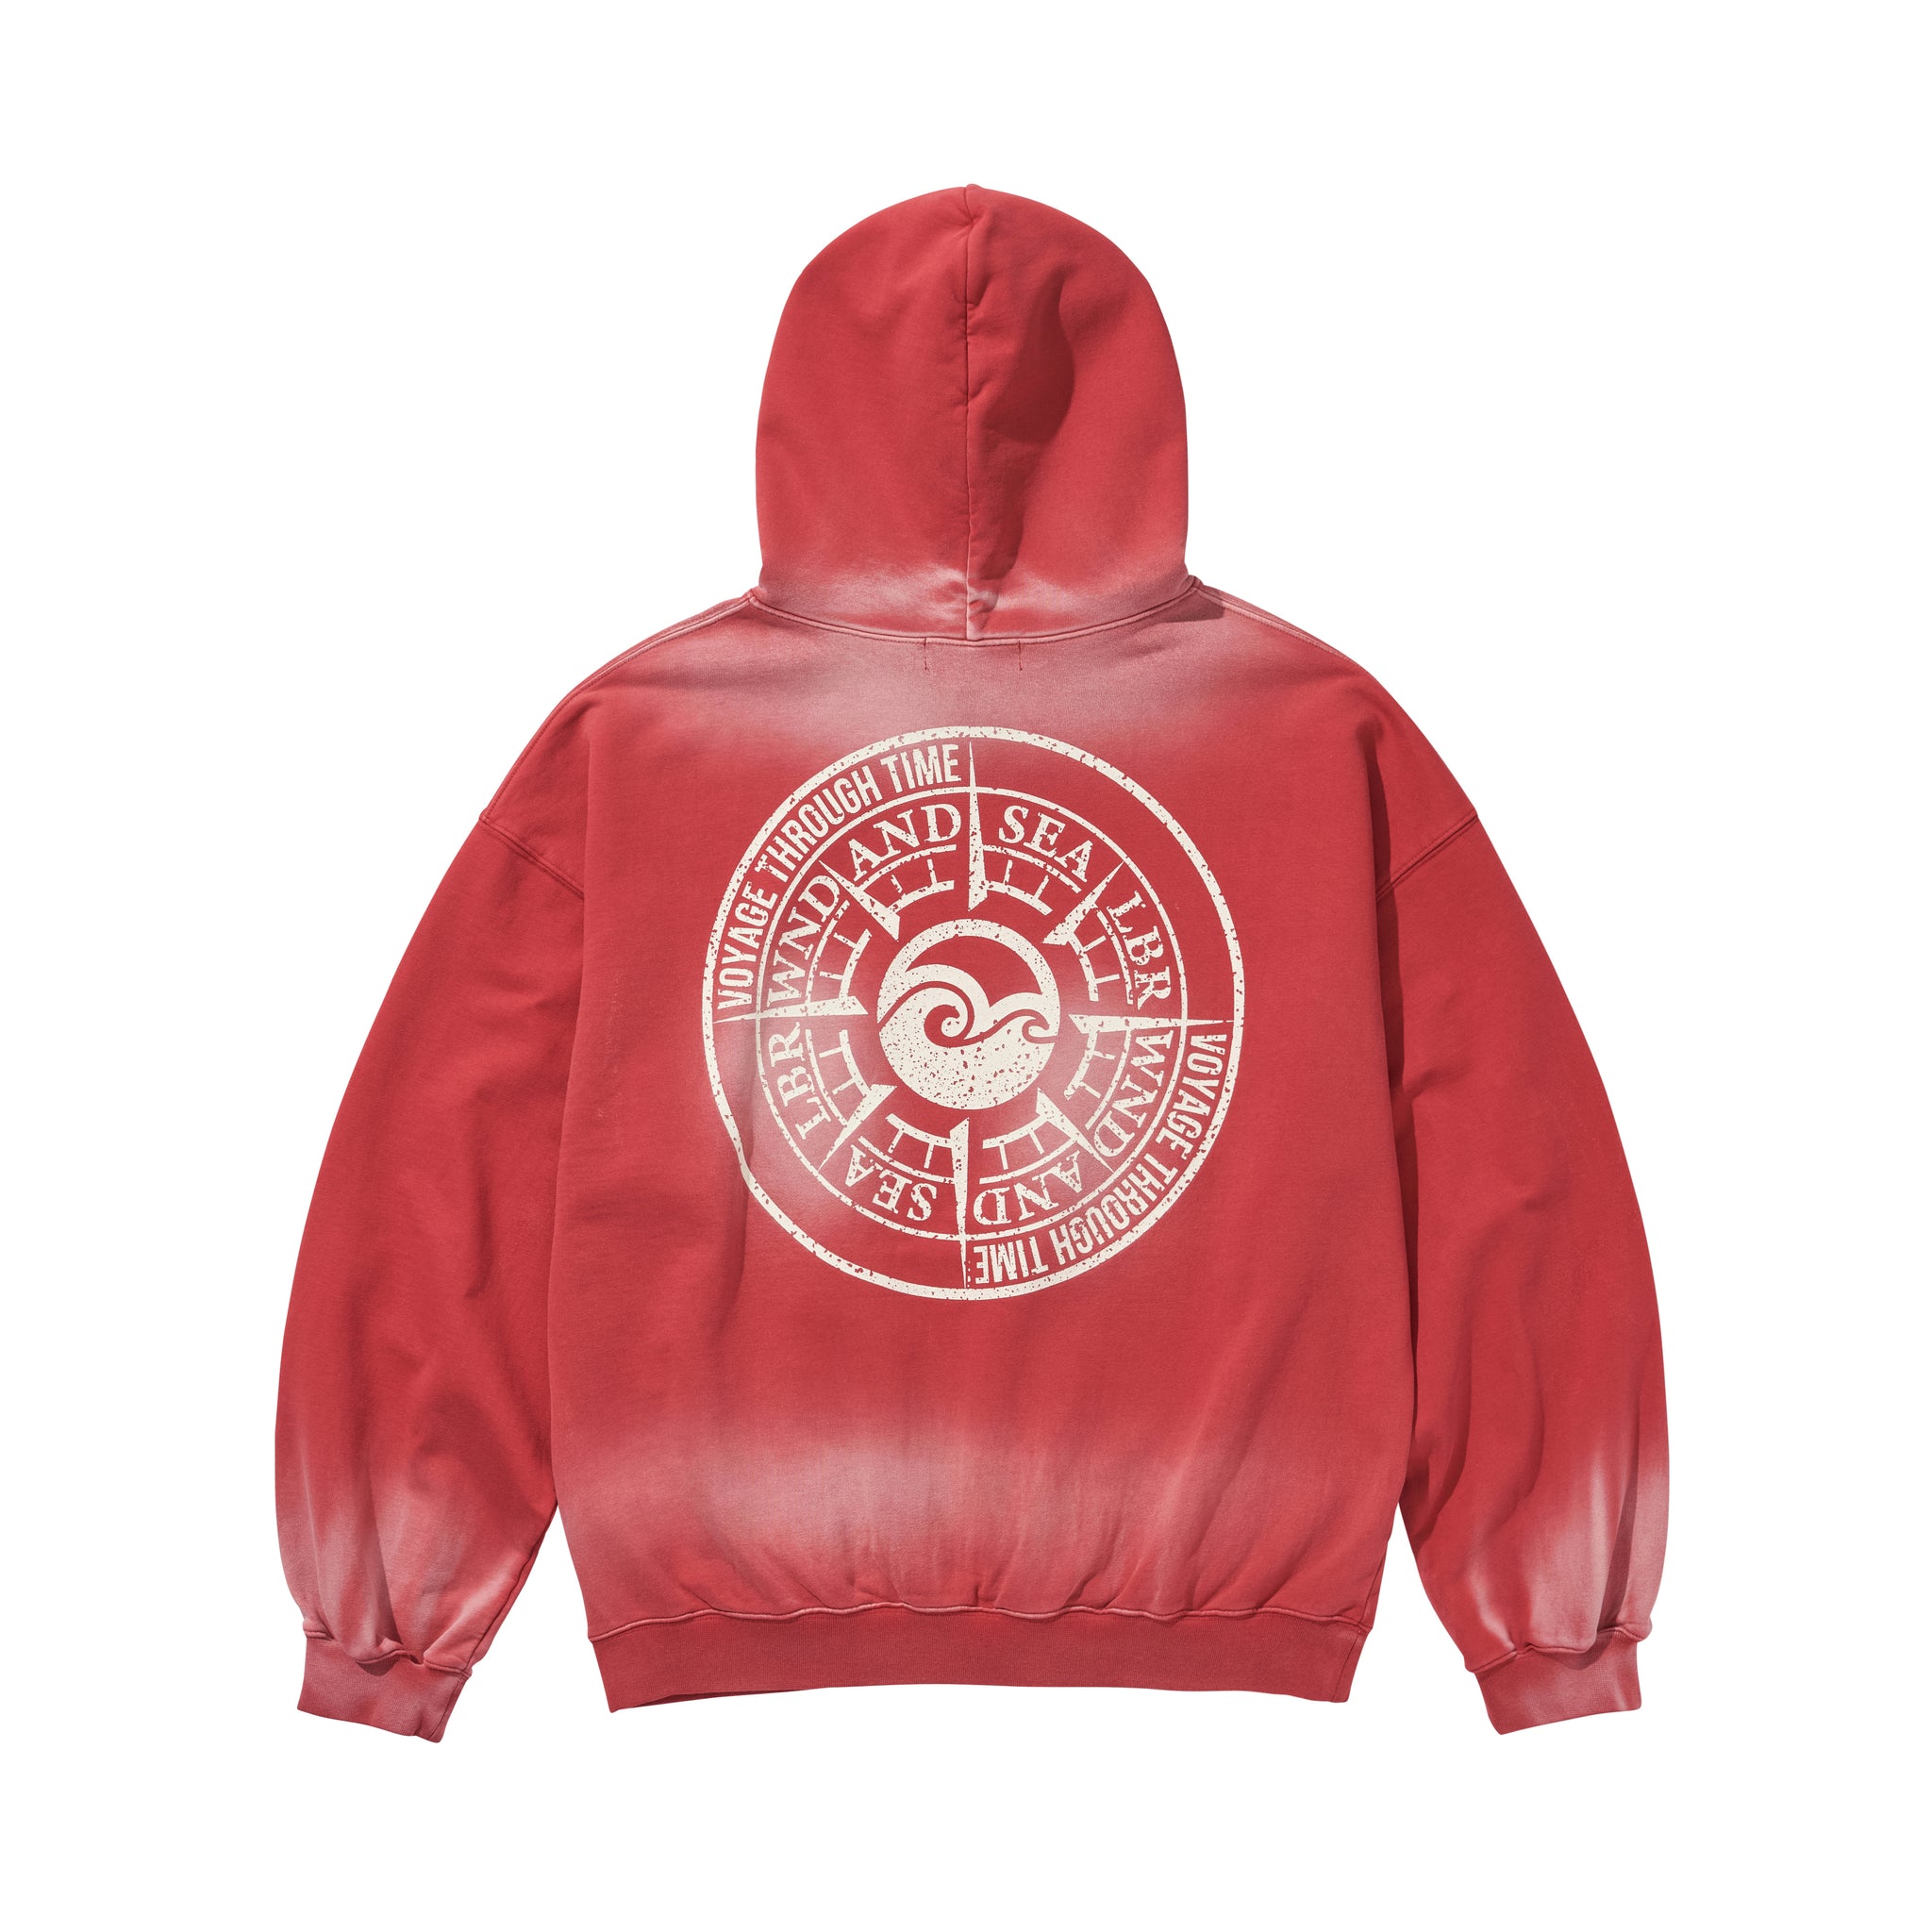 WDS X LIBERE PULLOVER HOODIE / RED